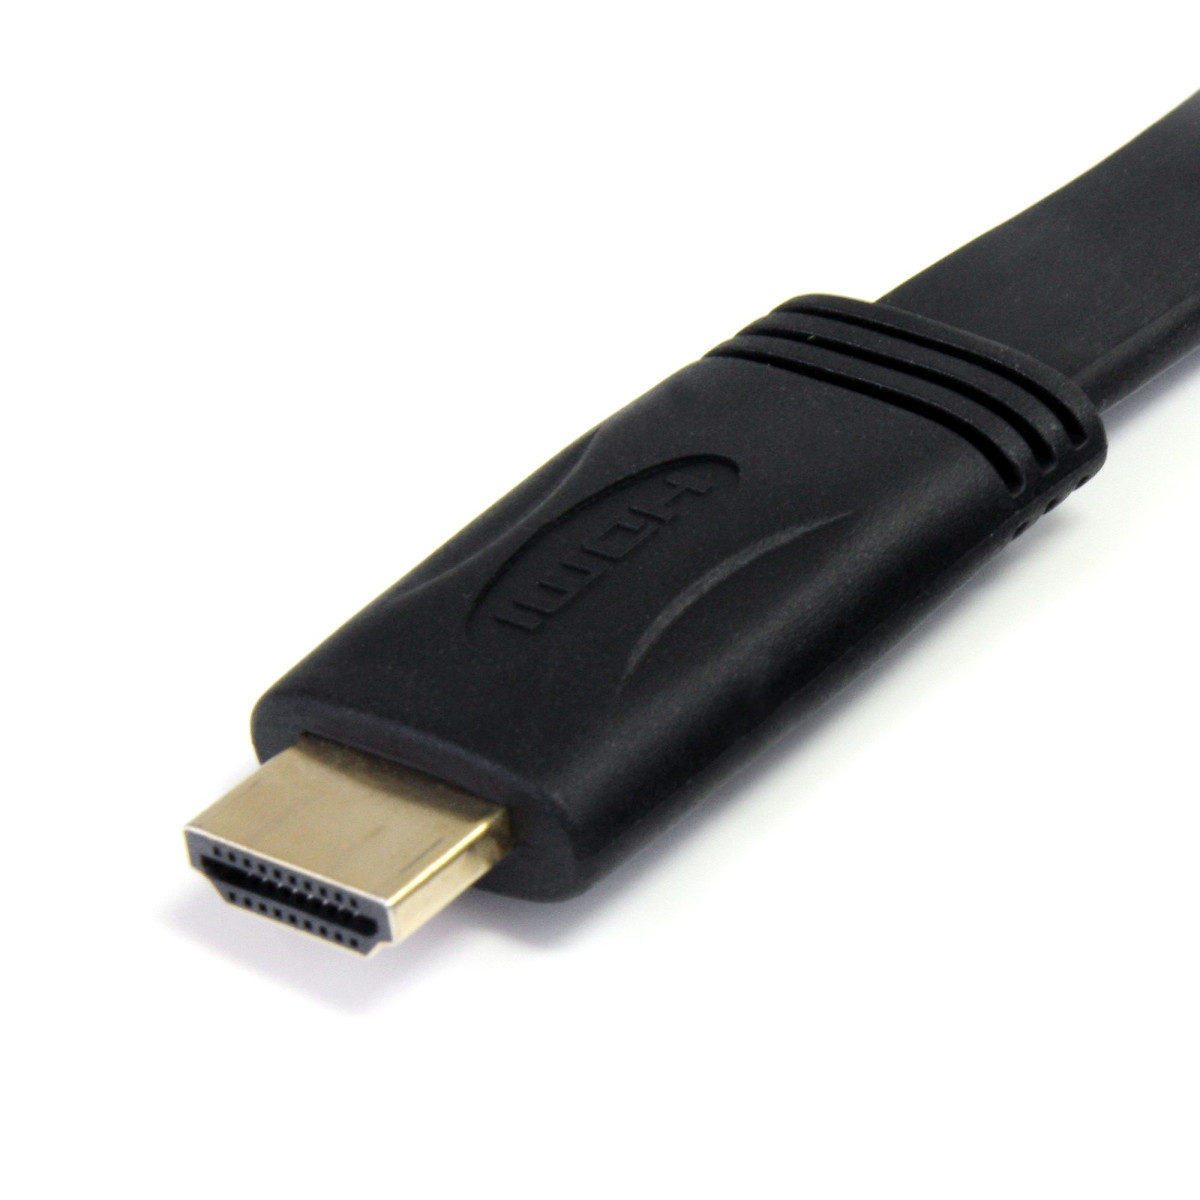 HDMI Digital Video Cable with Ethernet